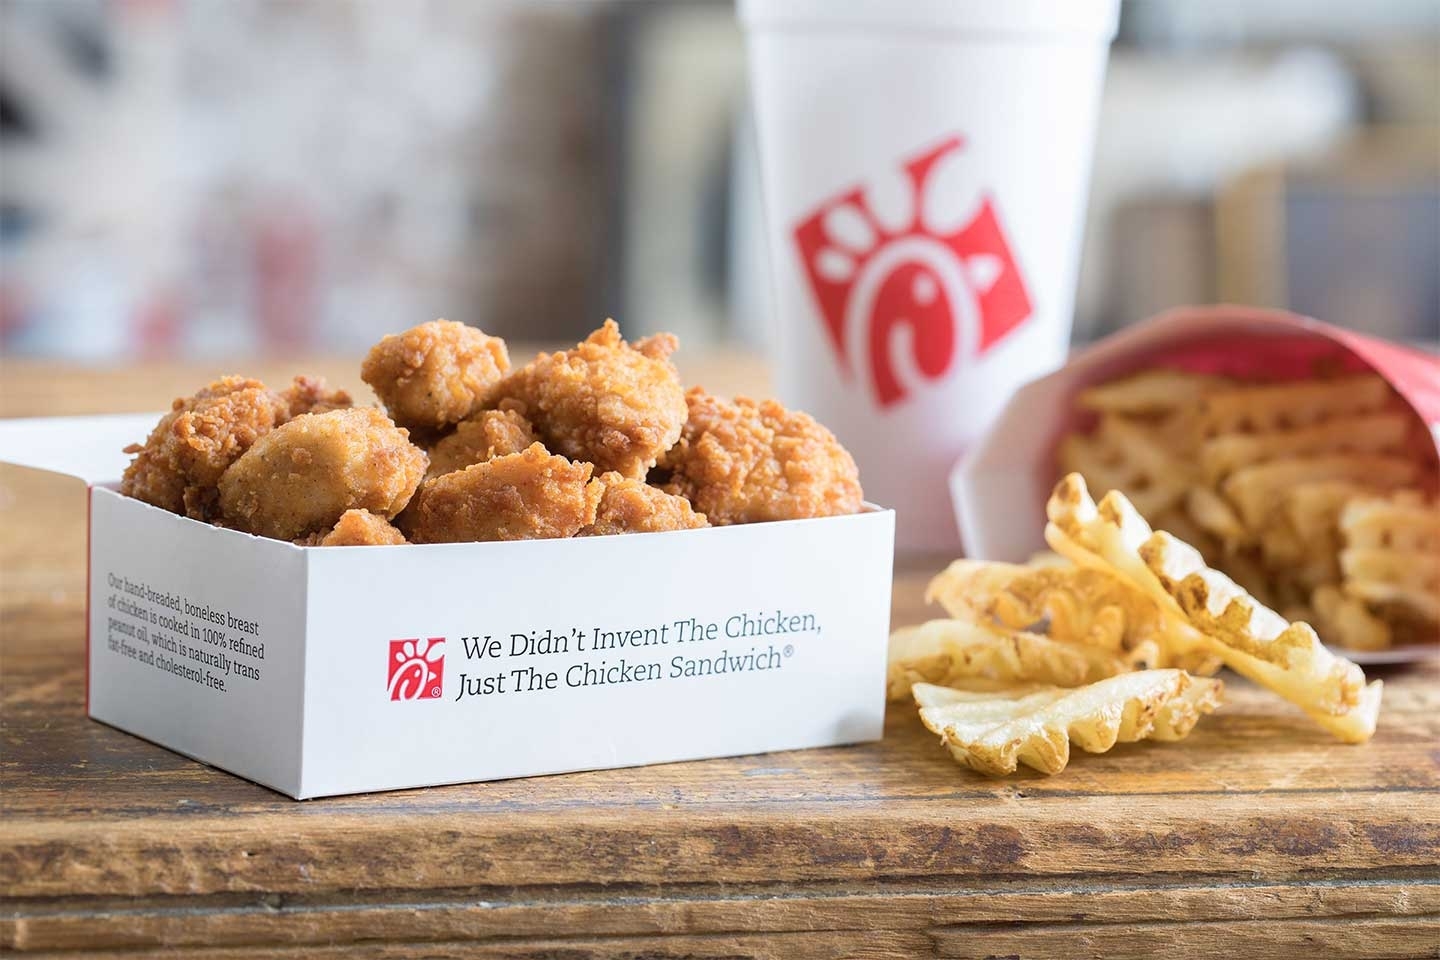 Mark Your Calendar: Free Chick-Fil-A Nuggets This January